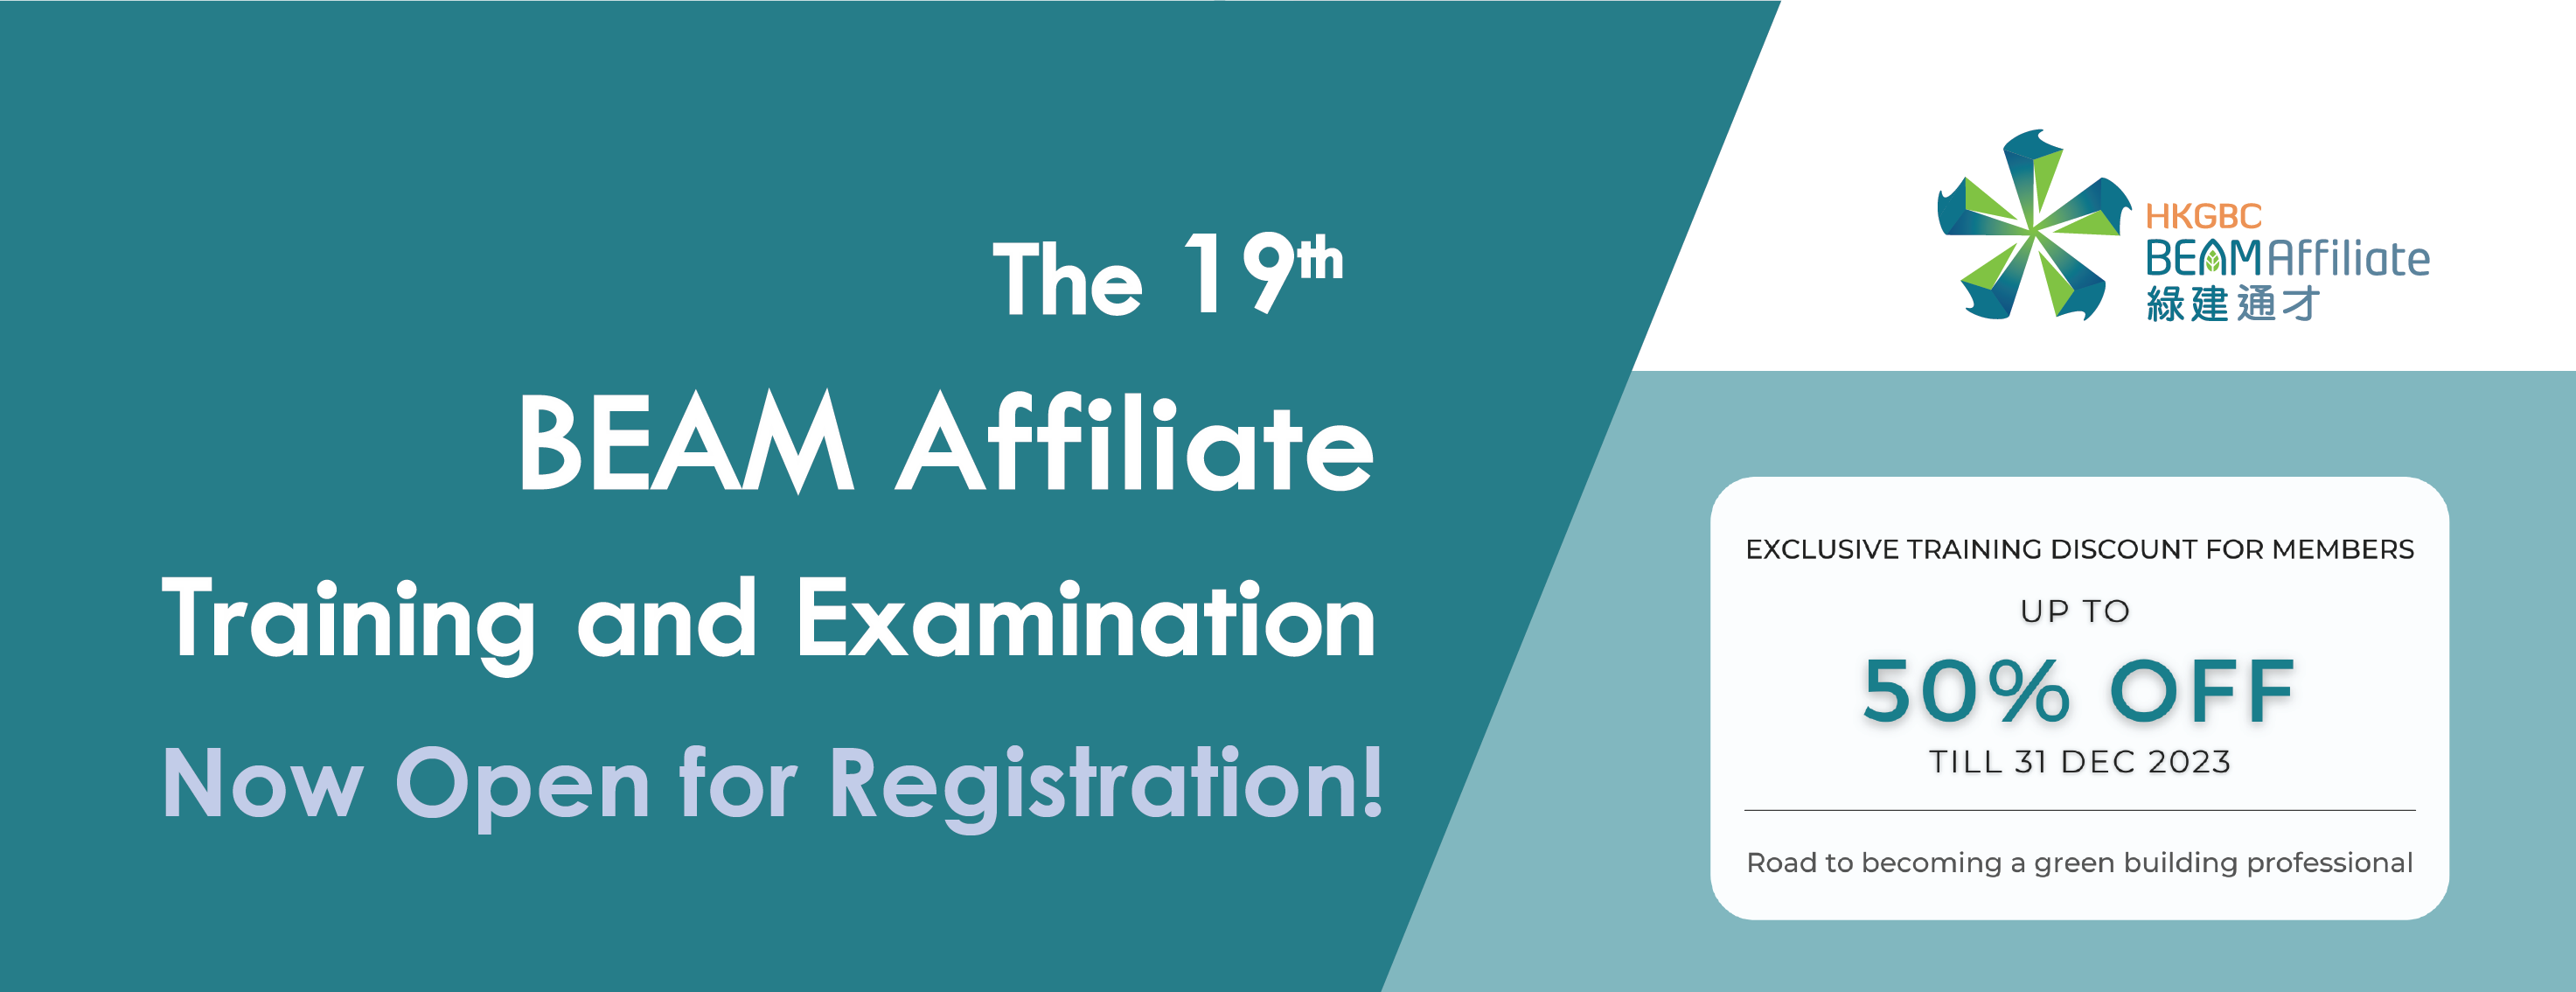 19th BEAM Affiliate Training and Examination l BEAM Society Limited (BSL)